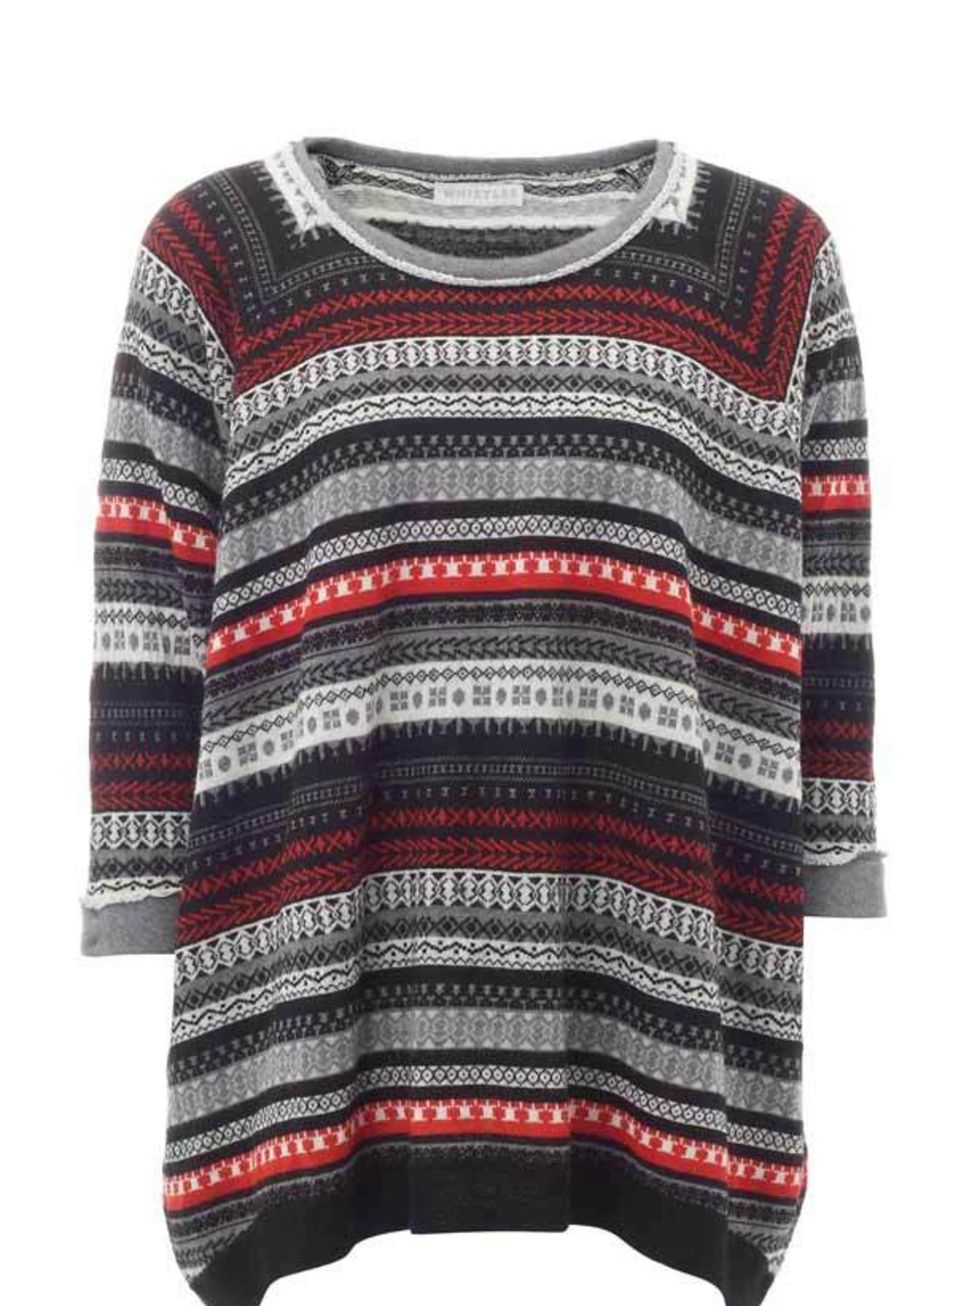 <p><a href="http://www.whistles.co.uk/fcp/categorylist/dept/shop?resetFilters=true">Whistles</a> Fair Isle knitted sweater, £85 </p>